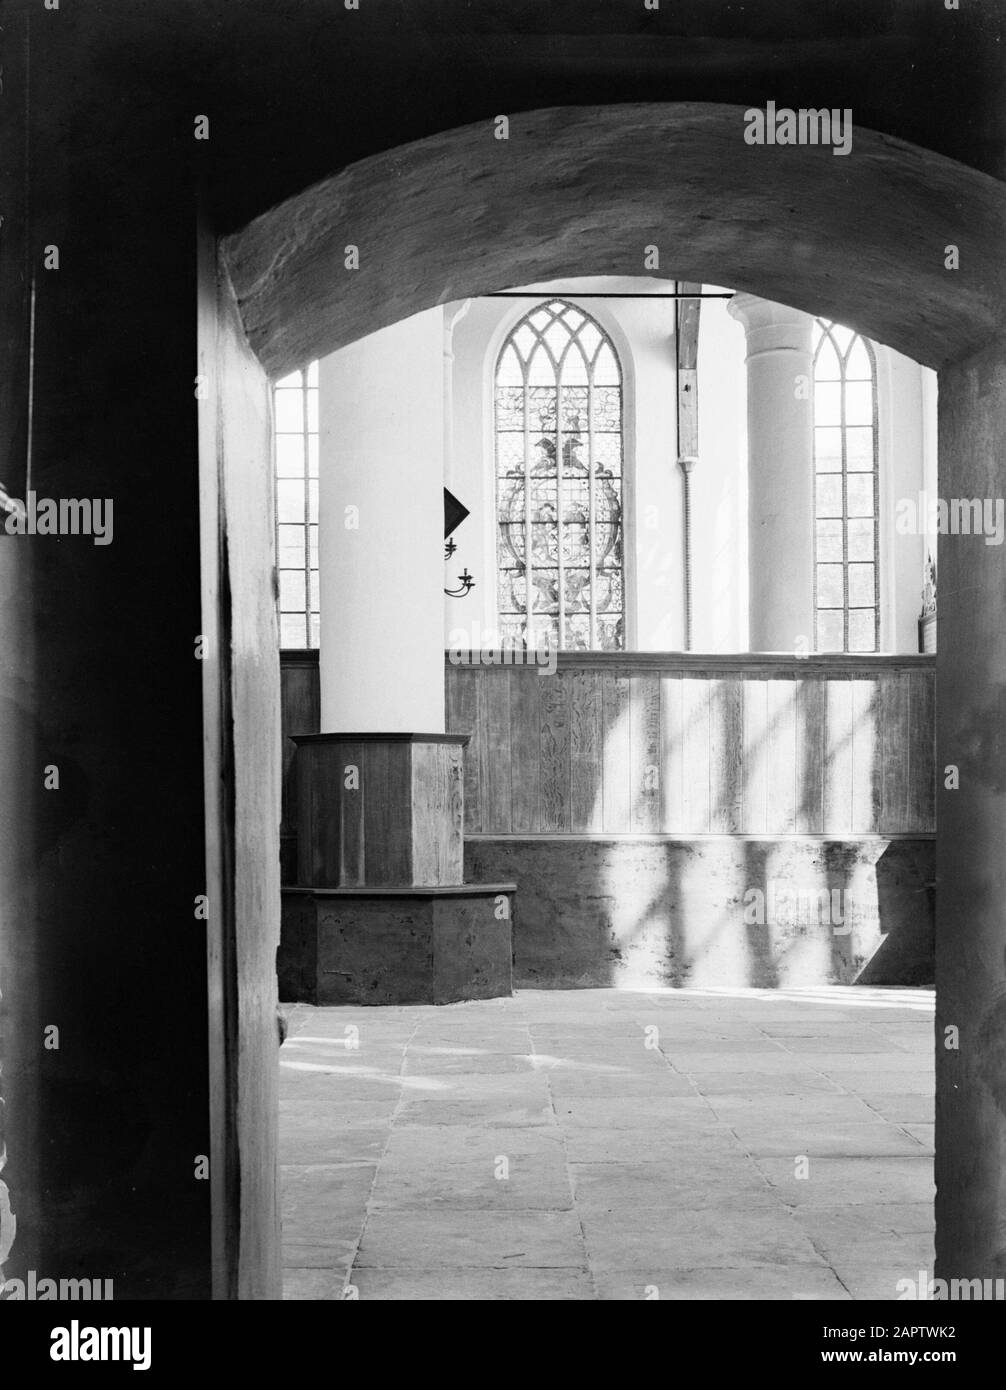 Great or Saint Nicholas Church in Edam  Interior of the Grote Kerk in Edam seen from a portal: the choir fence, pillars and a stained glass window Date: 1 January 1932 Location: Edam, North Holland Keywords: architecture, stained glass, interior, church buildings Stock Photo